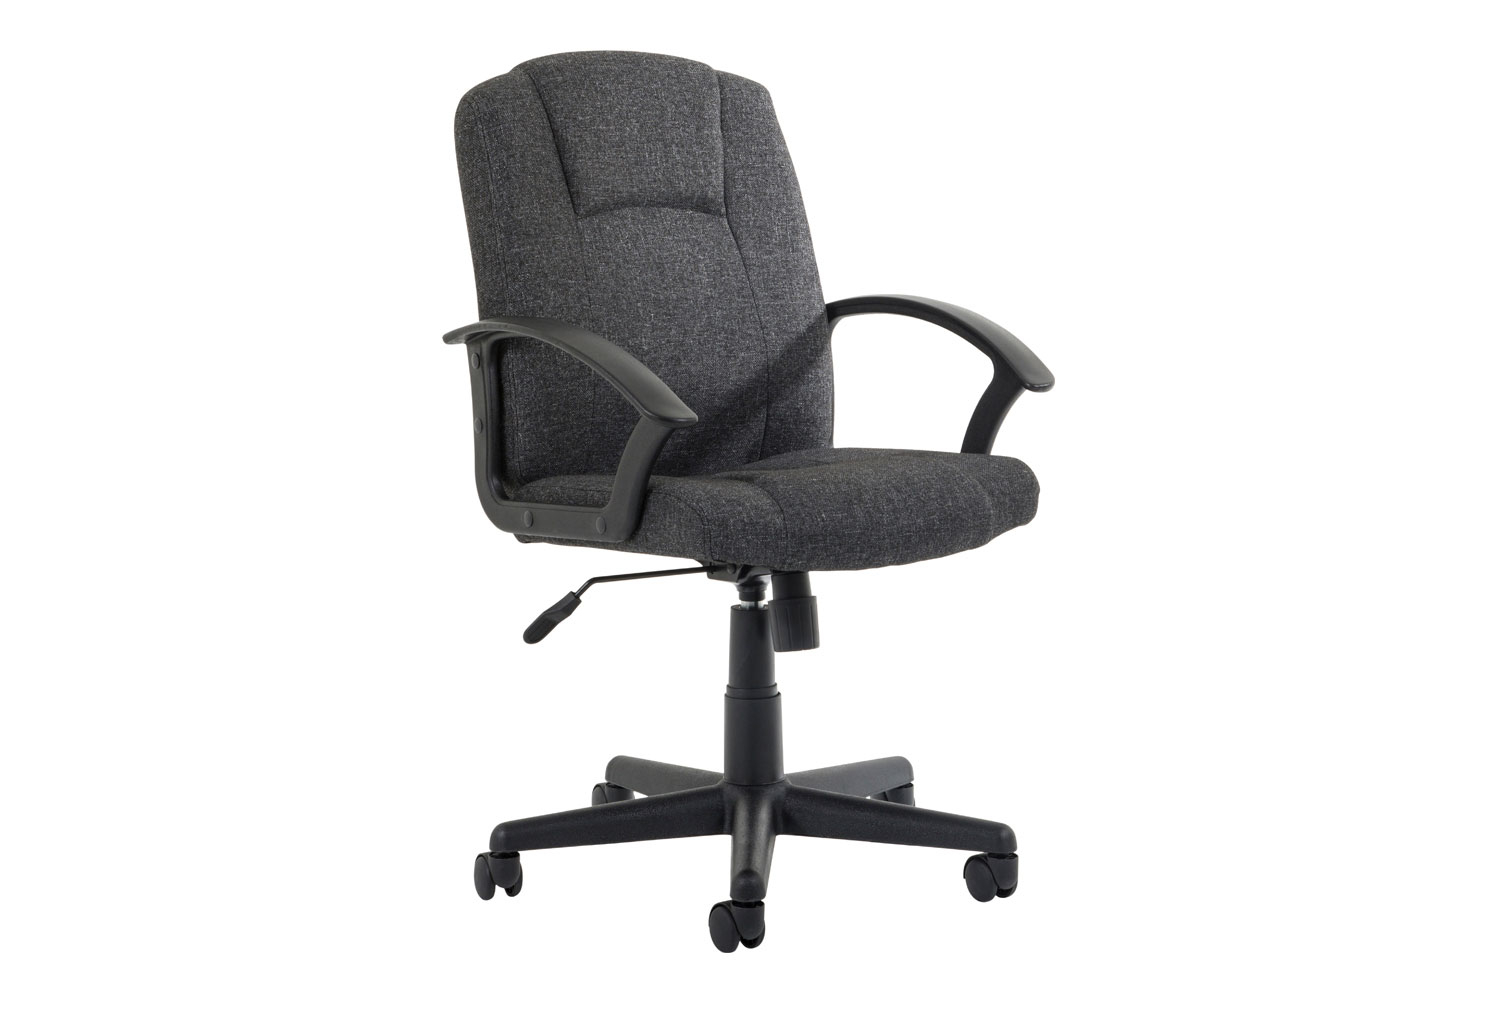 Dream Medium Back Fabric Executive Office Chair (Charcoal), Fully Installed